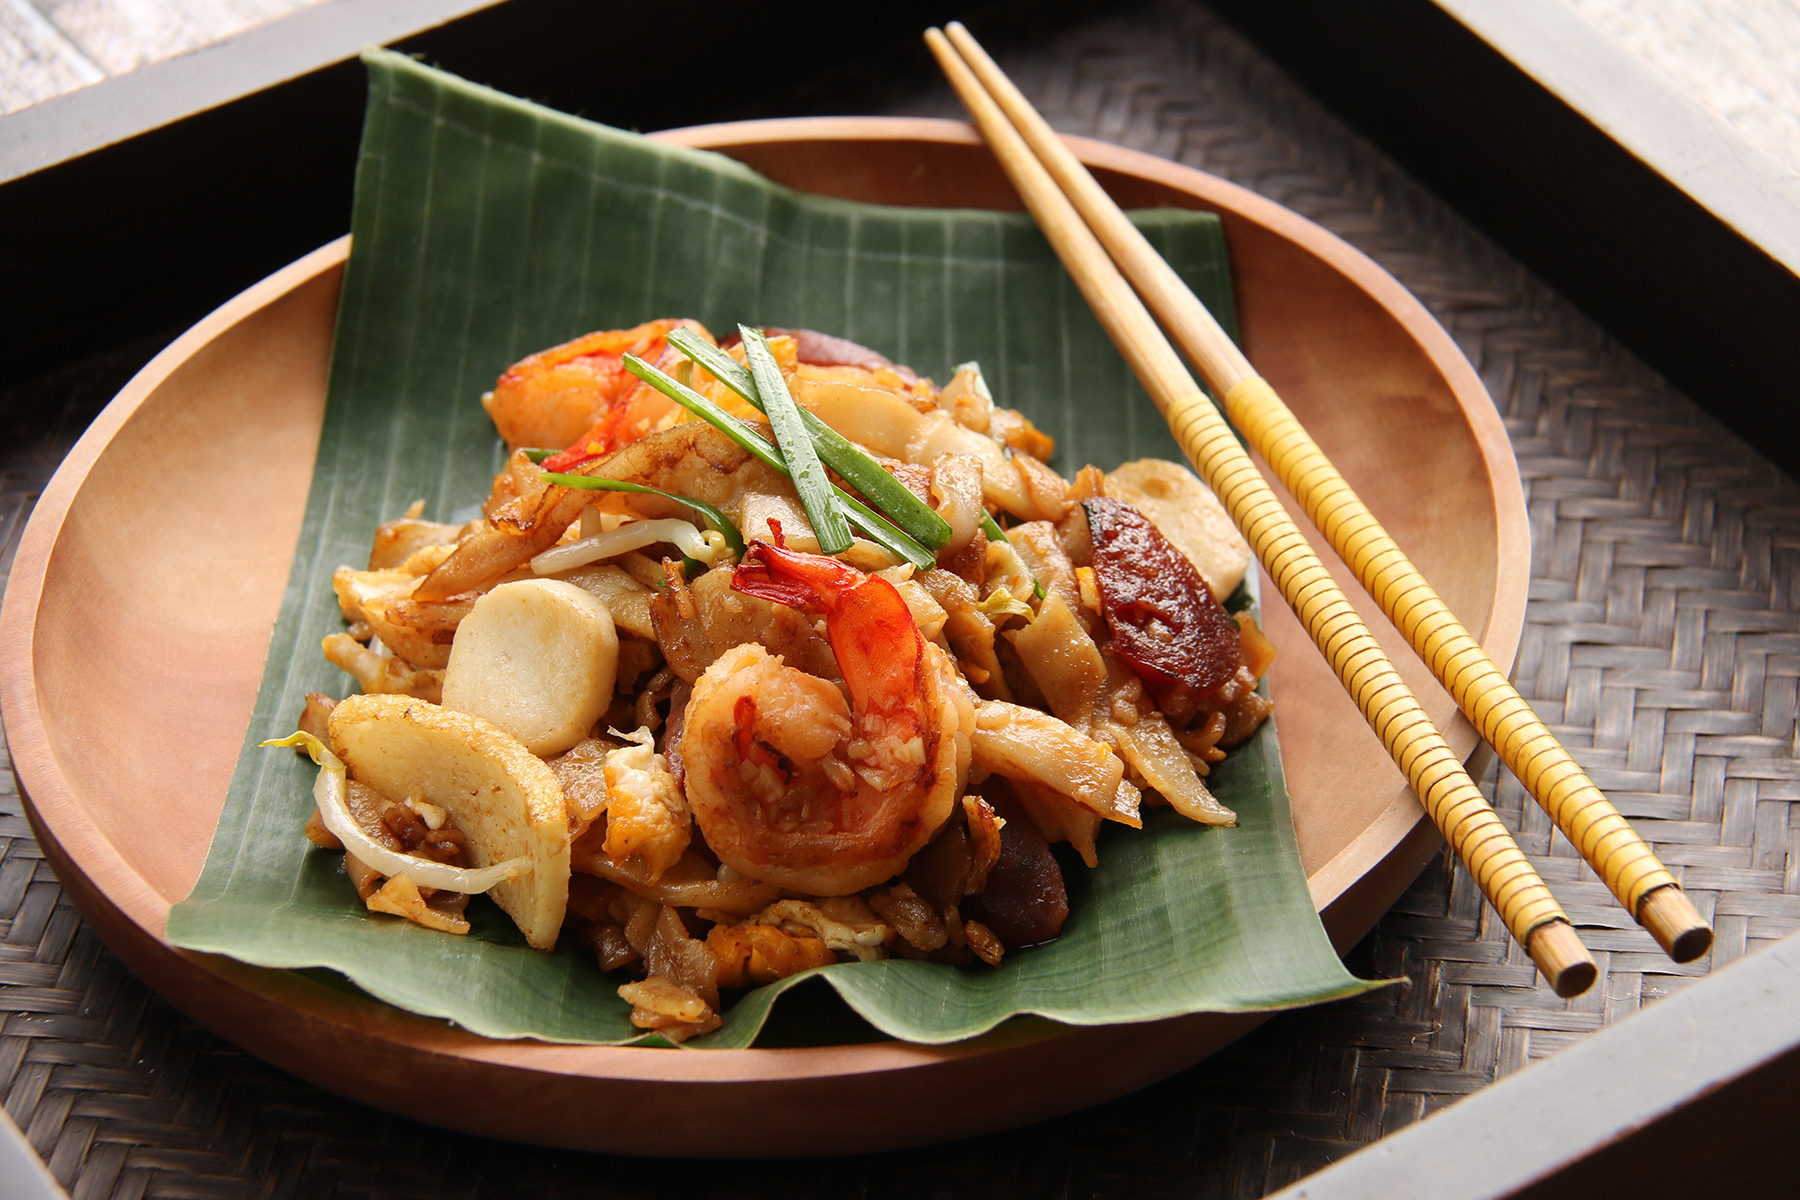 Char Kway Teow, a popular hawker food of stir-fried flat rice noodles from Singapore and Malaysia. It is served on a wooden plate that has been lined with banana leaf and chop sticks